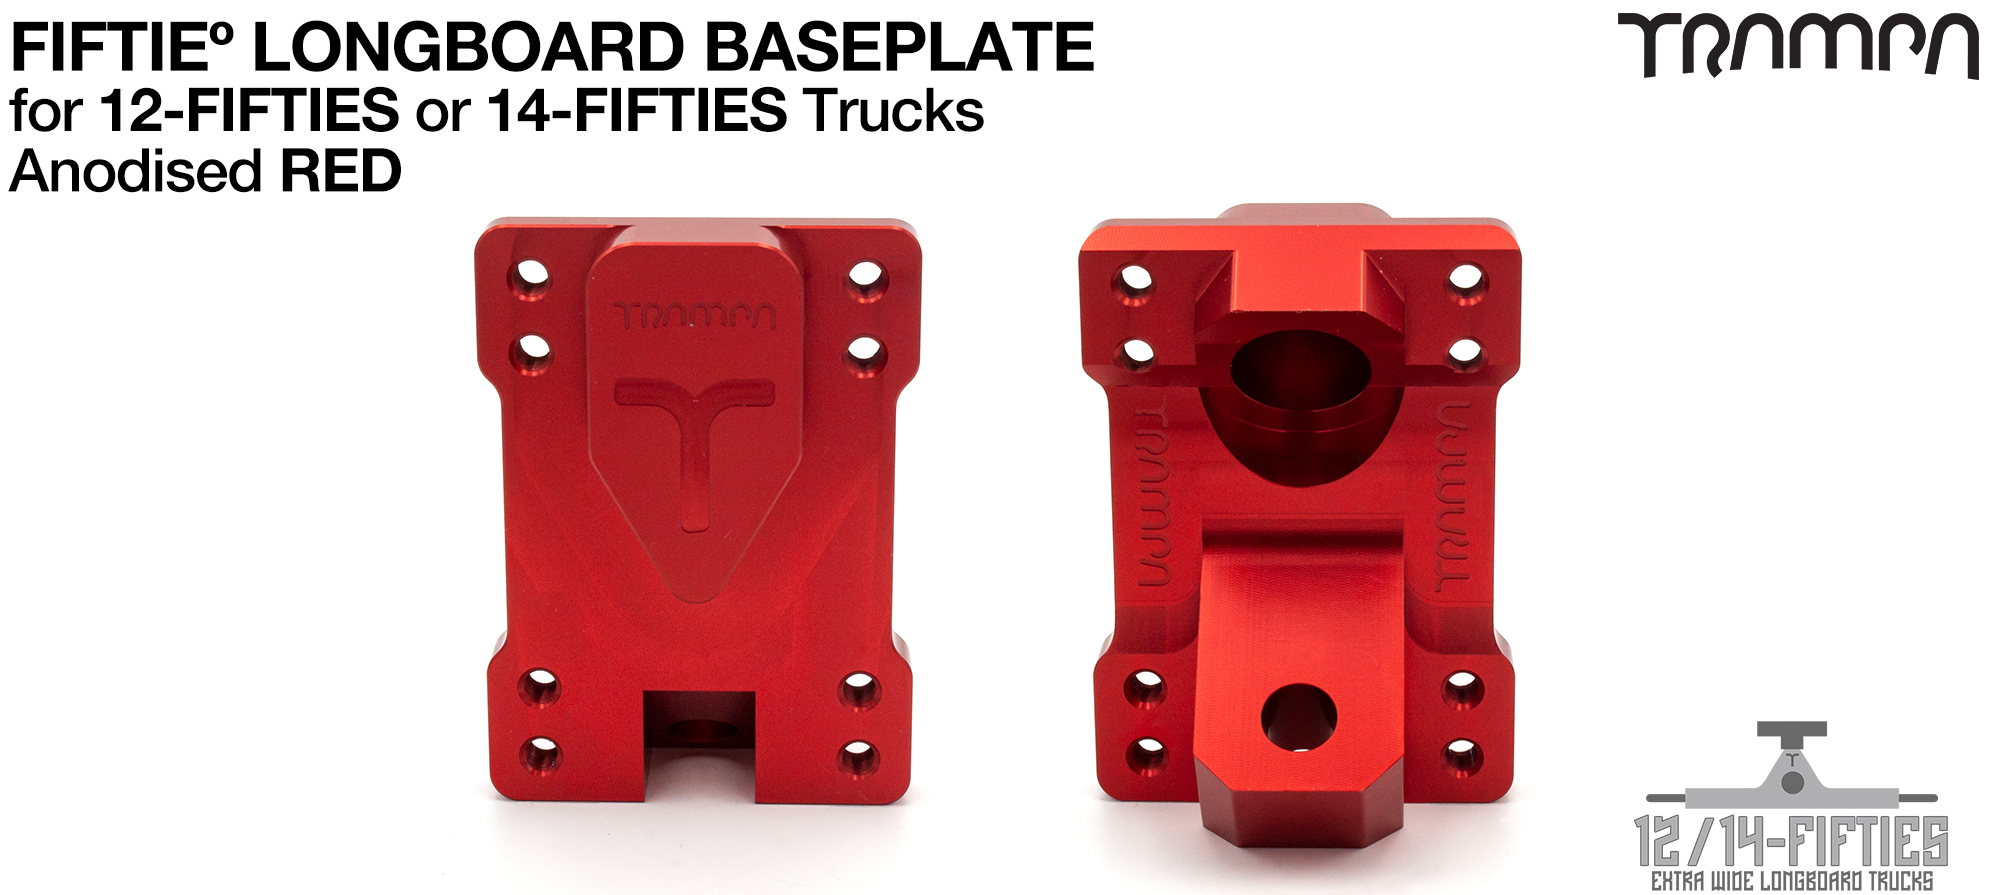 14 FIFTIES Baseplate - RED